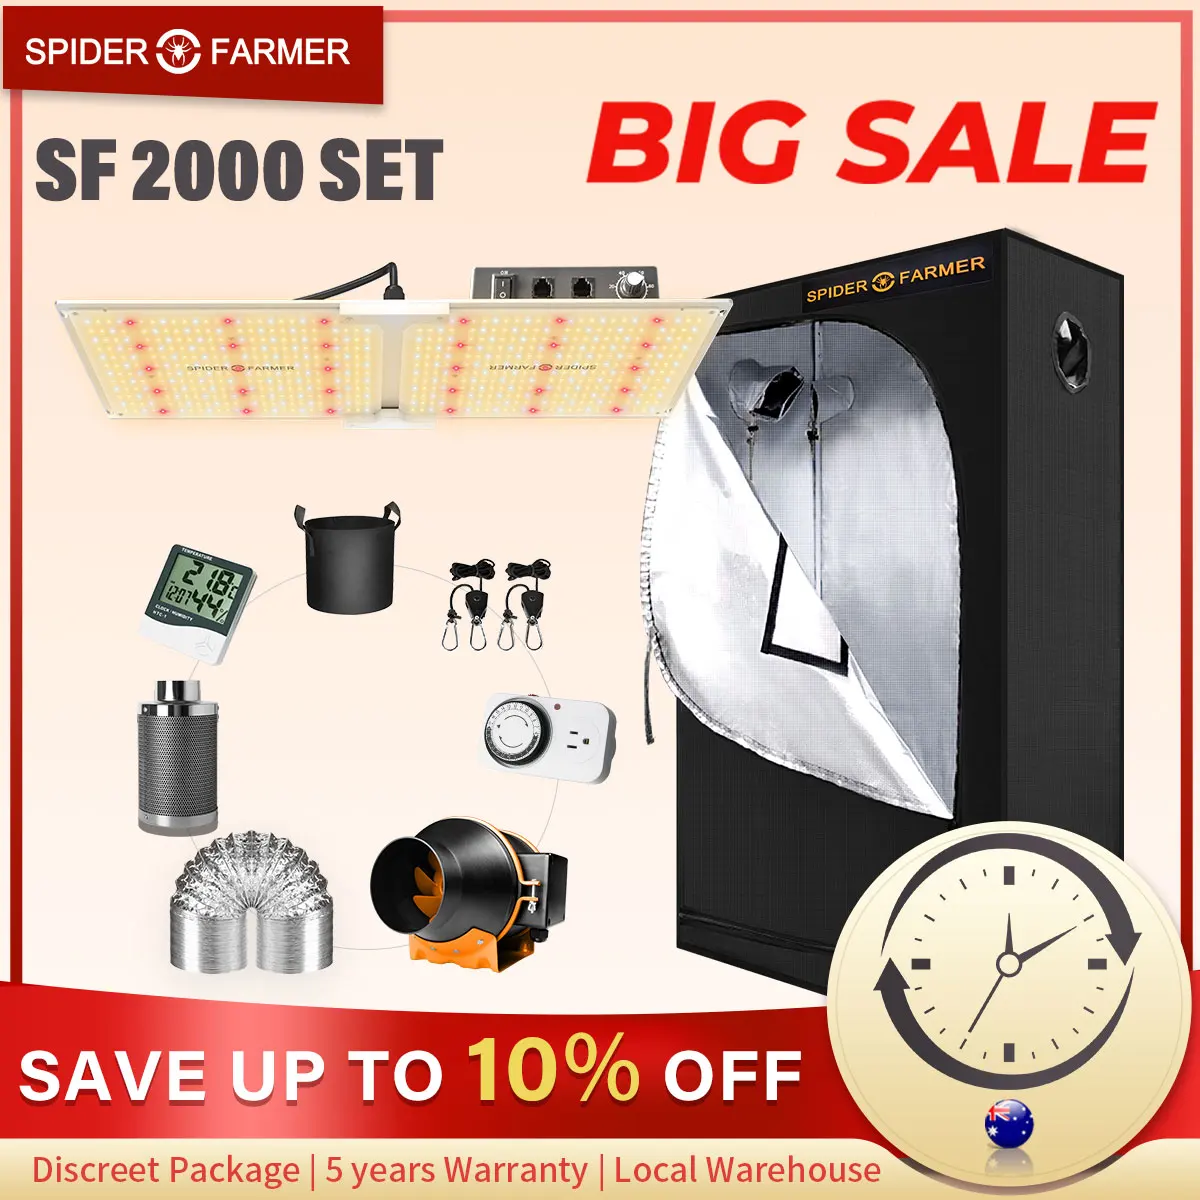 

Spider Farmer SF 2000W and 120x60cm Tent Kits Carbon Filter with Samsung Led LM301D Dimmer LED Grow Light Full Spectrum Lamp